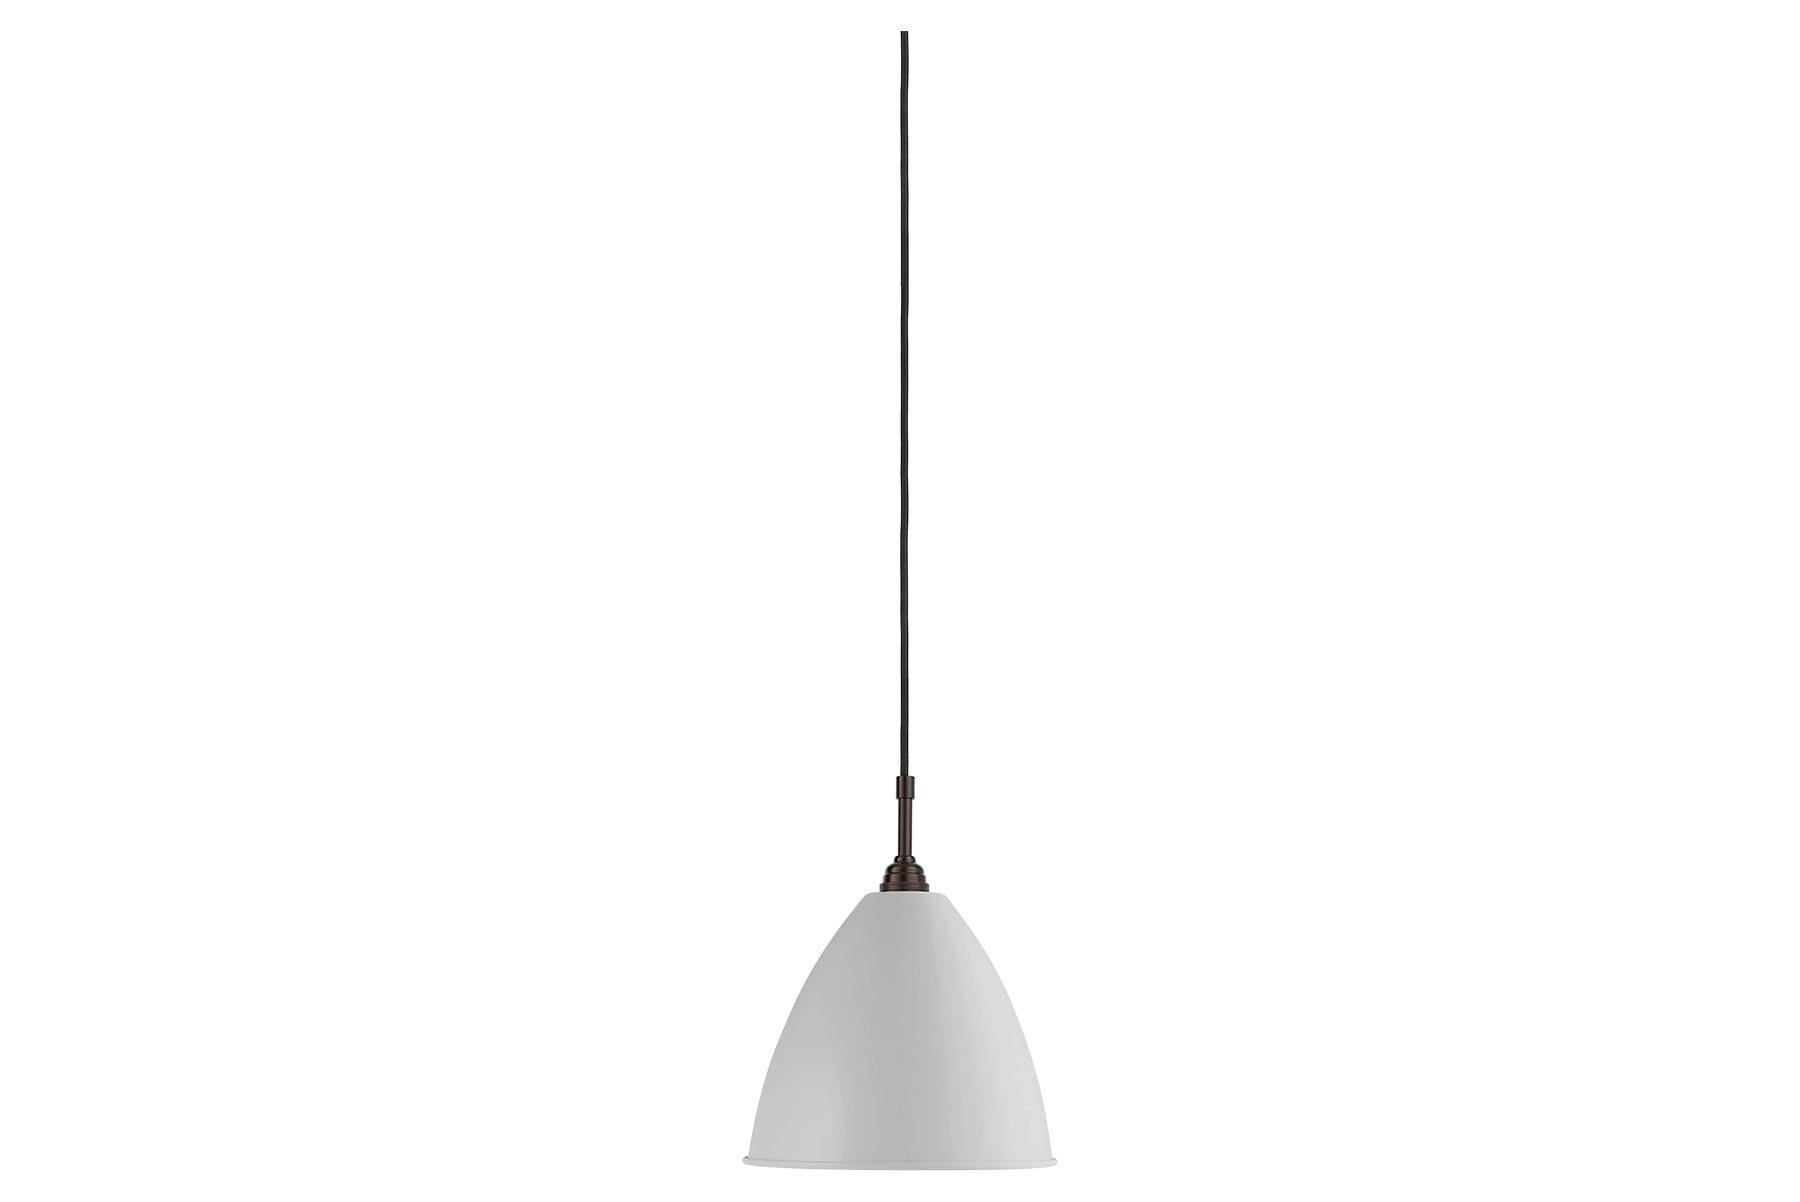 The Bestlite BL9 Pendant in four sizes and in a numerous of finishes was designed in 1930 by the Bauhaus influenced British designer Robert Dudley Best. With its great heritage and contemporary look, the BL9 Pendant is a coveted design worldwide.